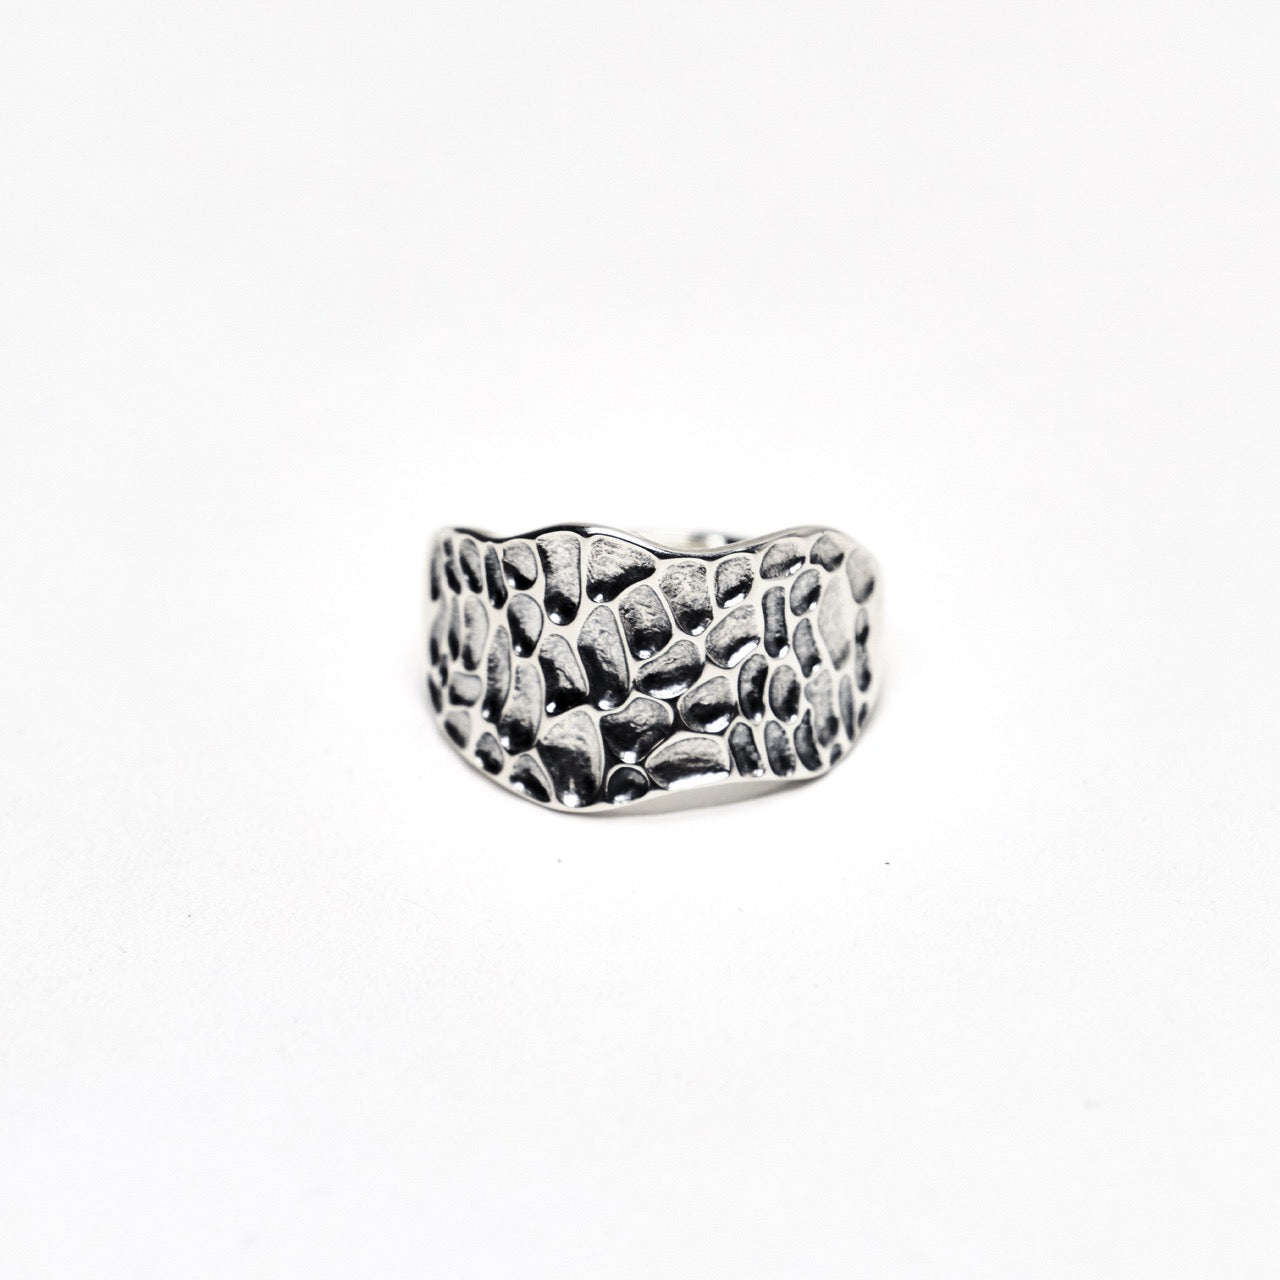 Lunar Crater Chunk Ring in Sterling Silver